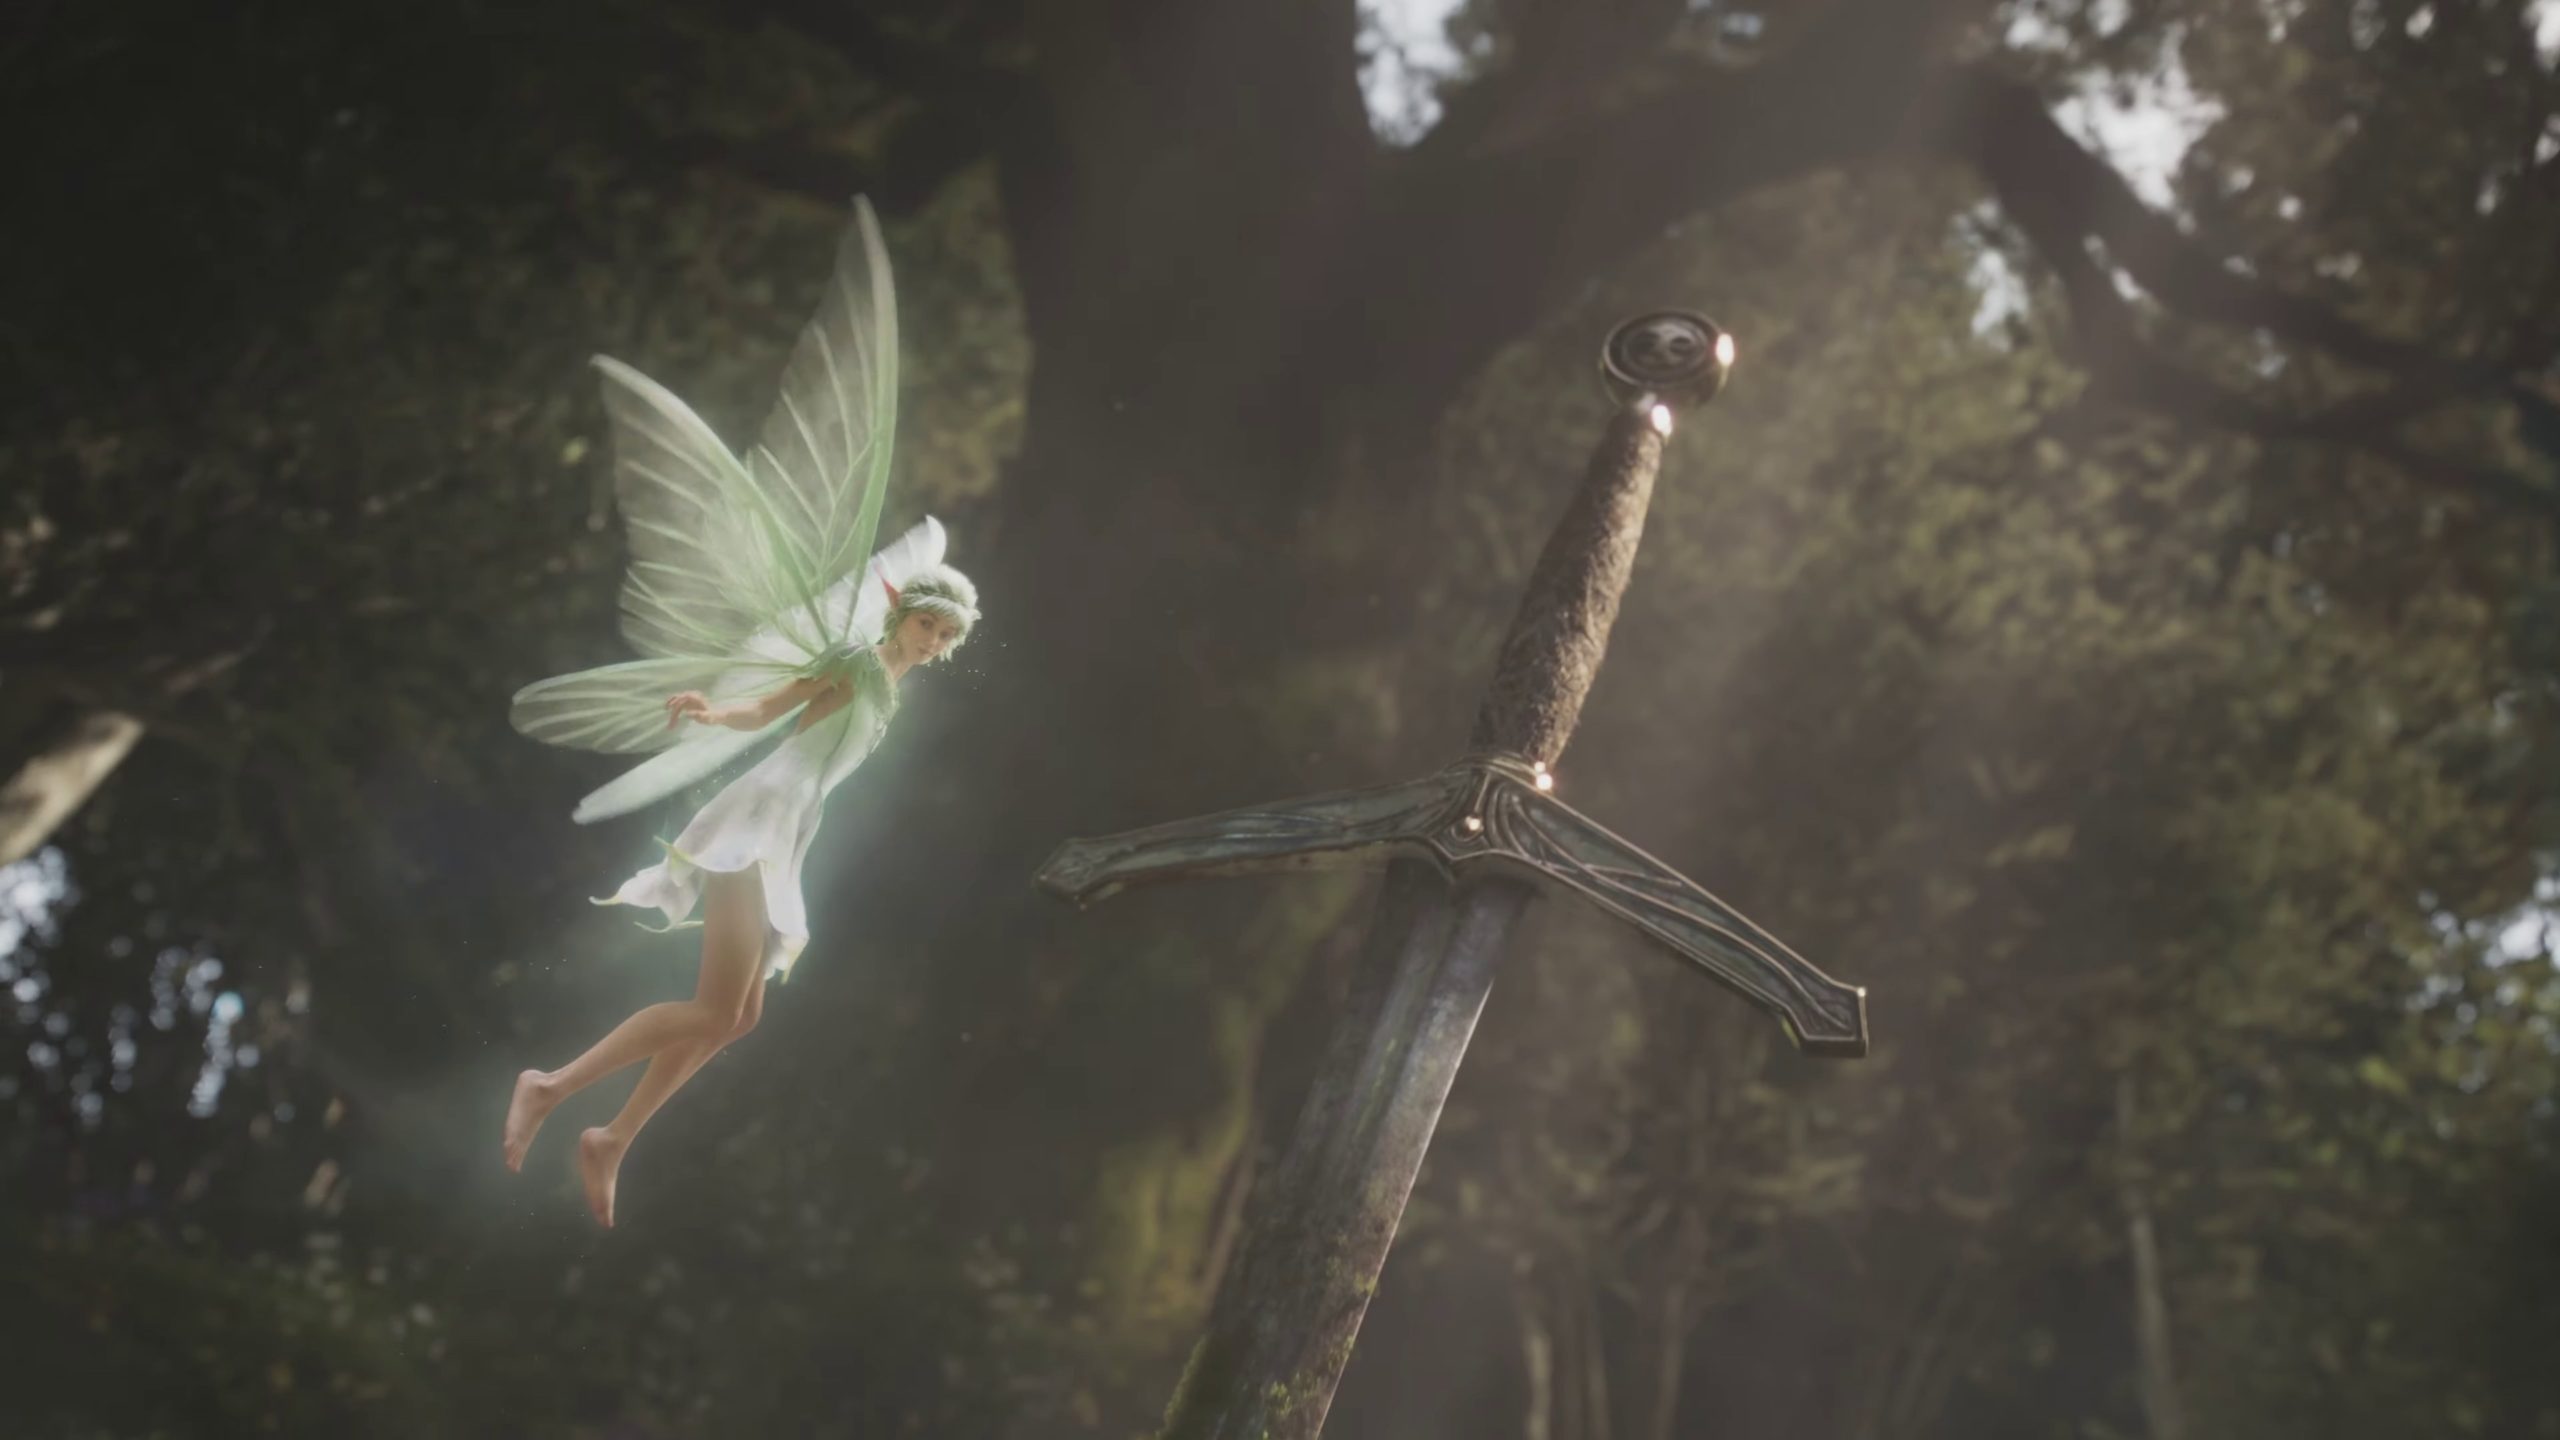 Still from Fable's promotional trailer